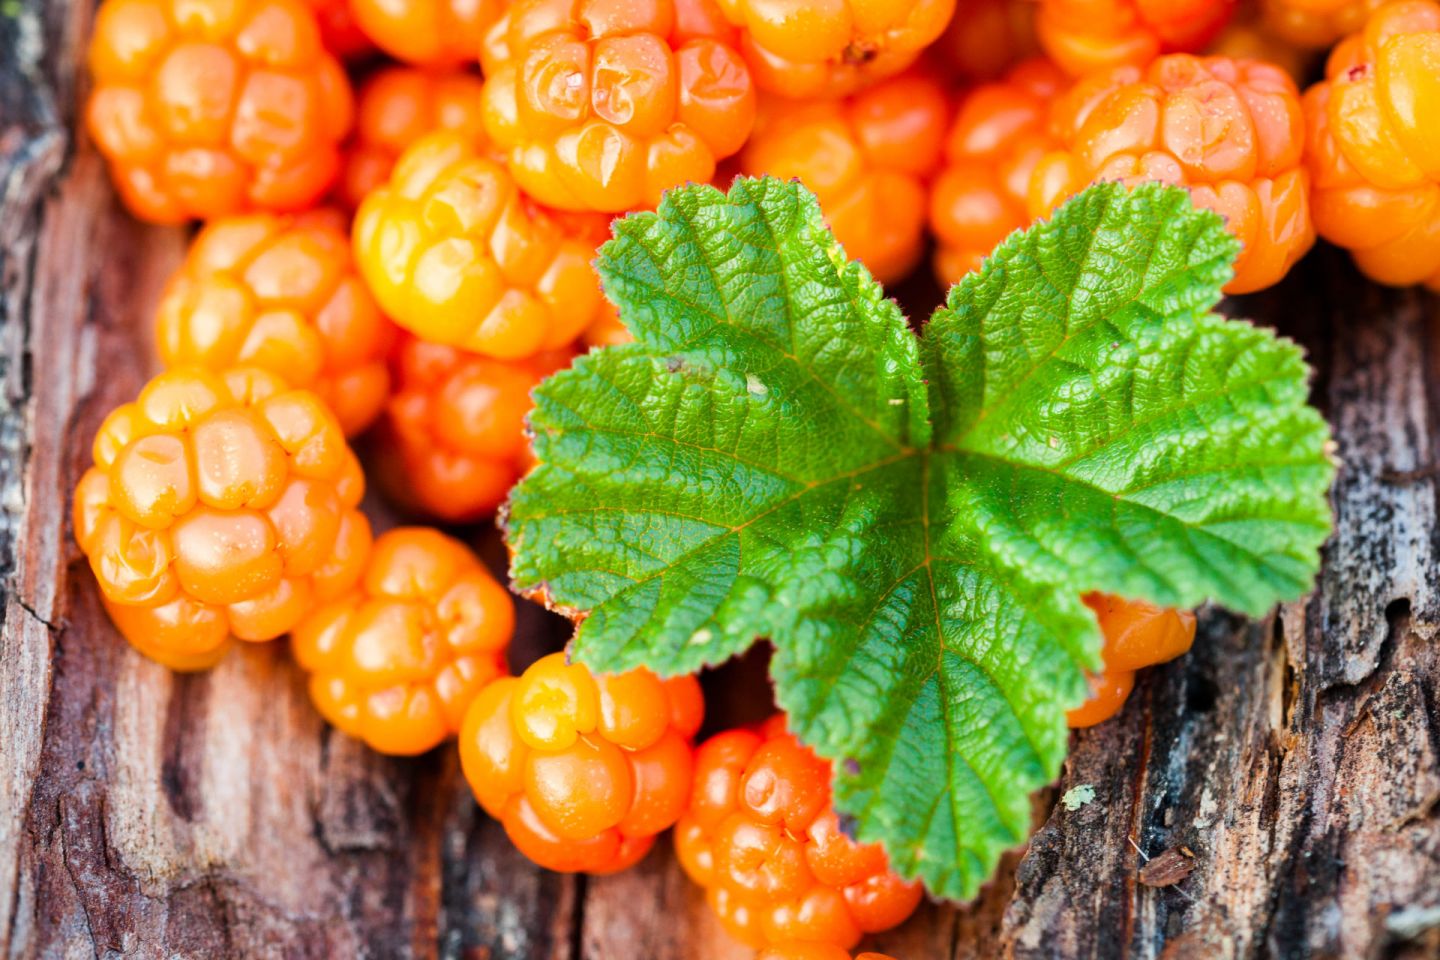 Cloudberries from the village of Ranua, Finland